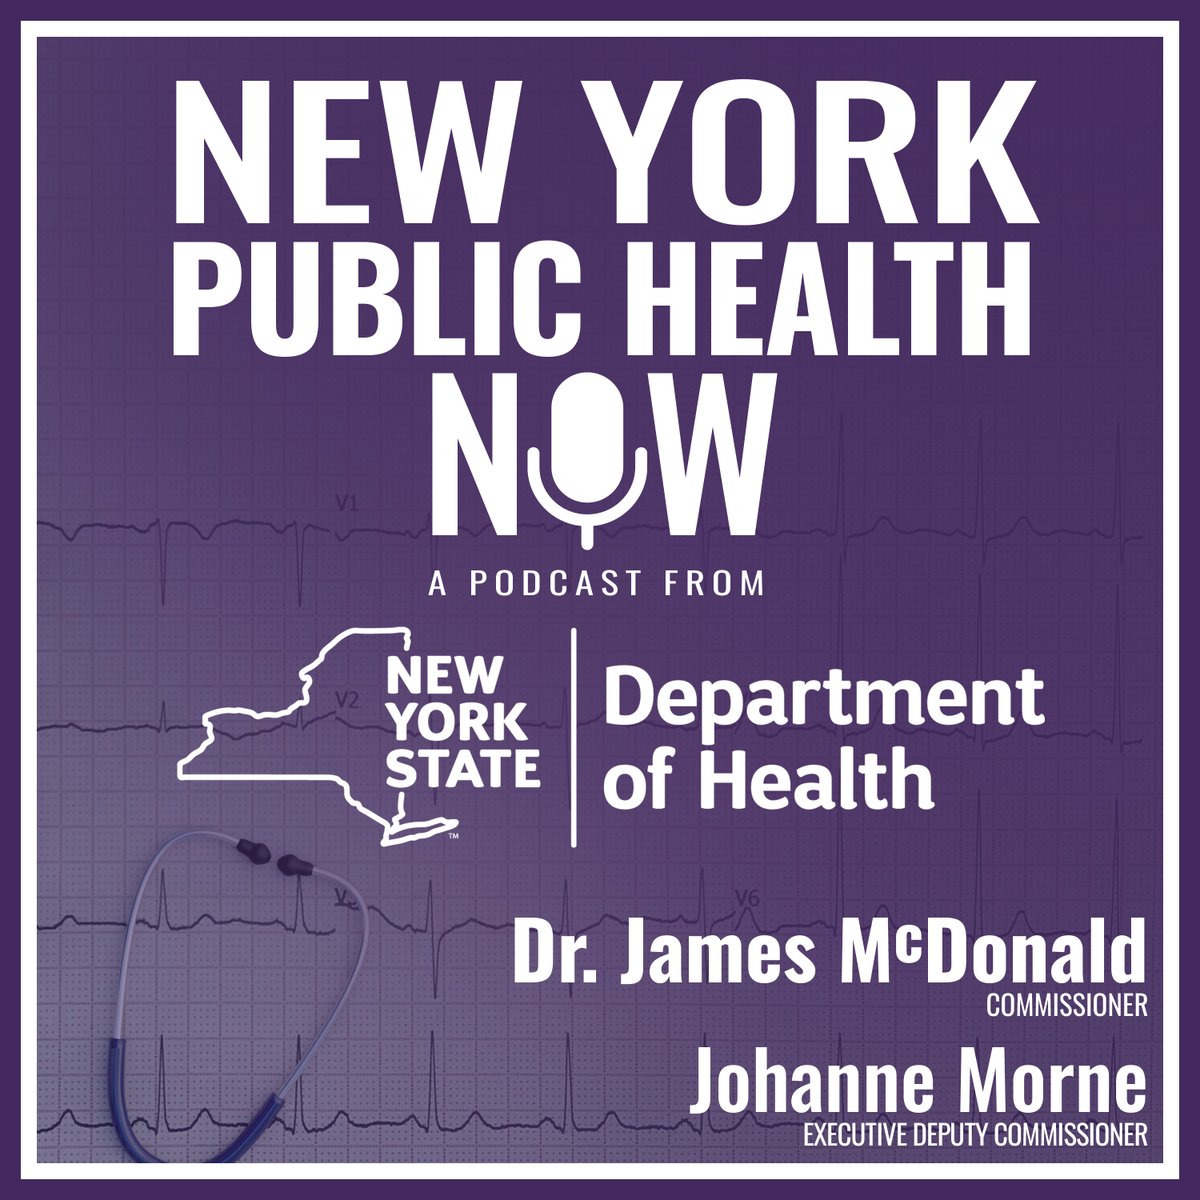 With the total solar eclipse just days away, we recorded a special episode of our podcast to discuss health, safety and planning for the special event. Listen here: health.ny.gov/commissioner/p…